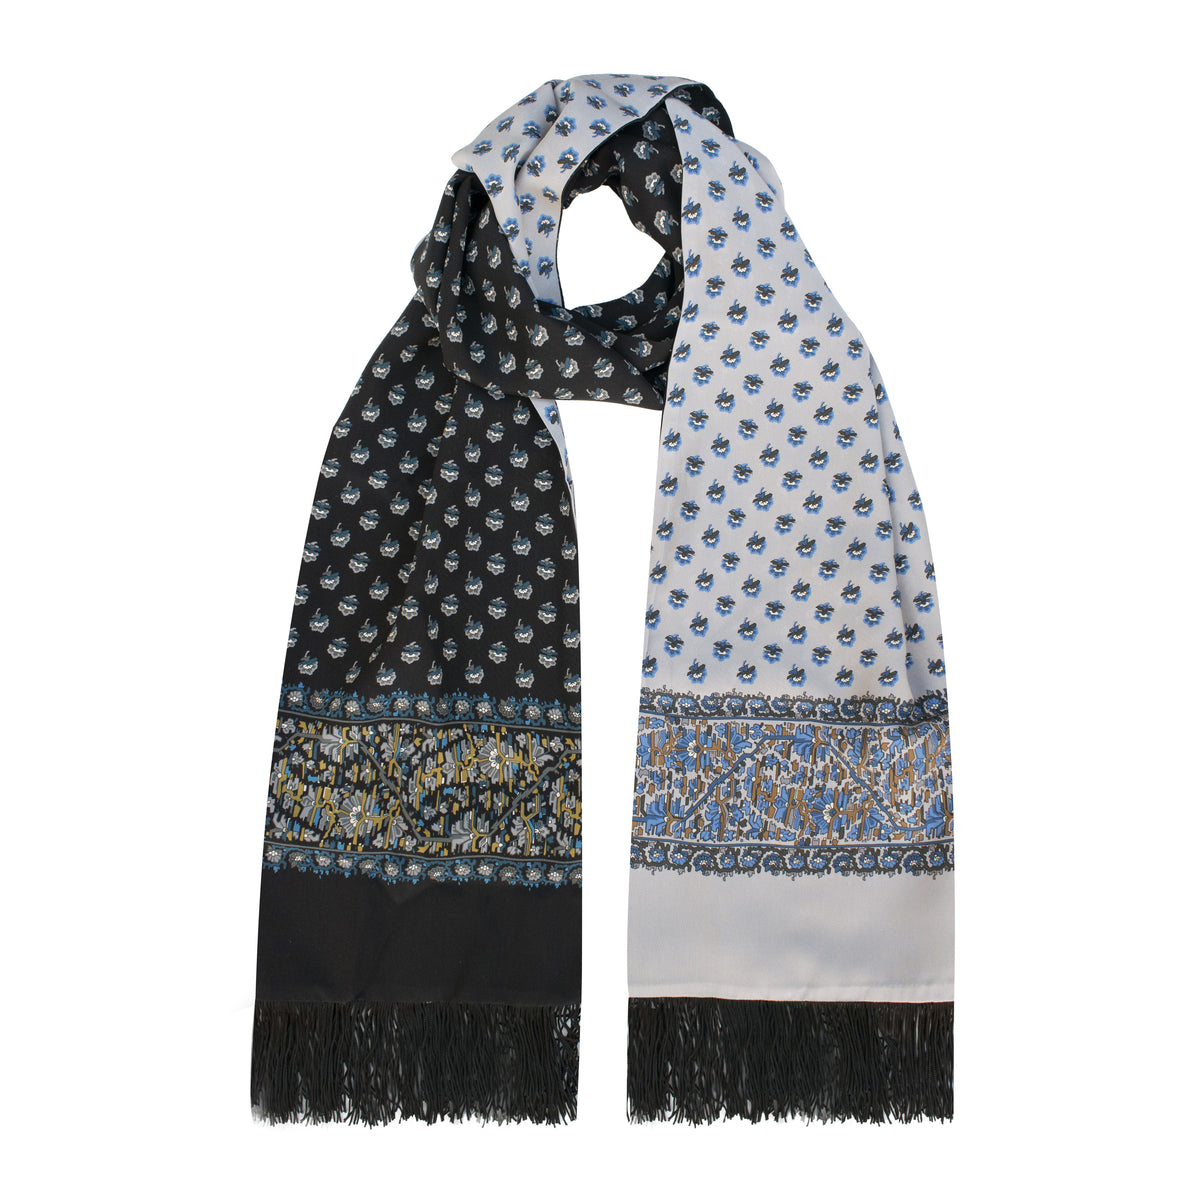 DOUBLEFACE SILK SCARF WITH MICRO MOTIF PRINTED AND FRINGES                  SKU: CHARLESTON